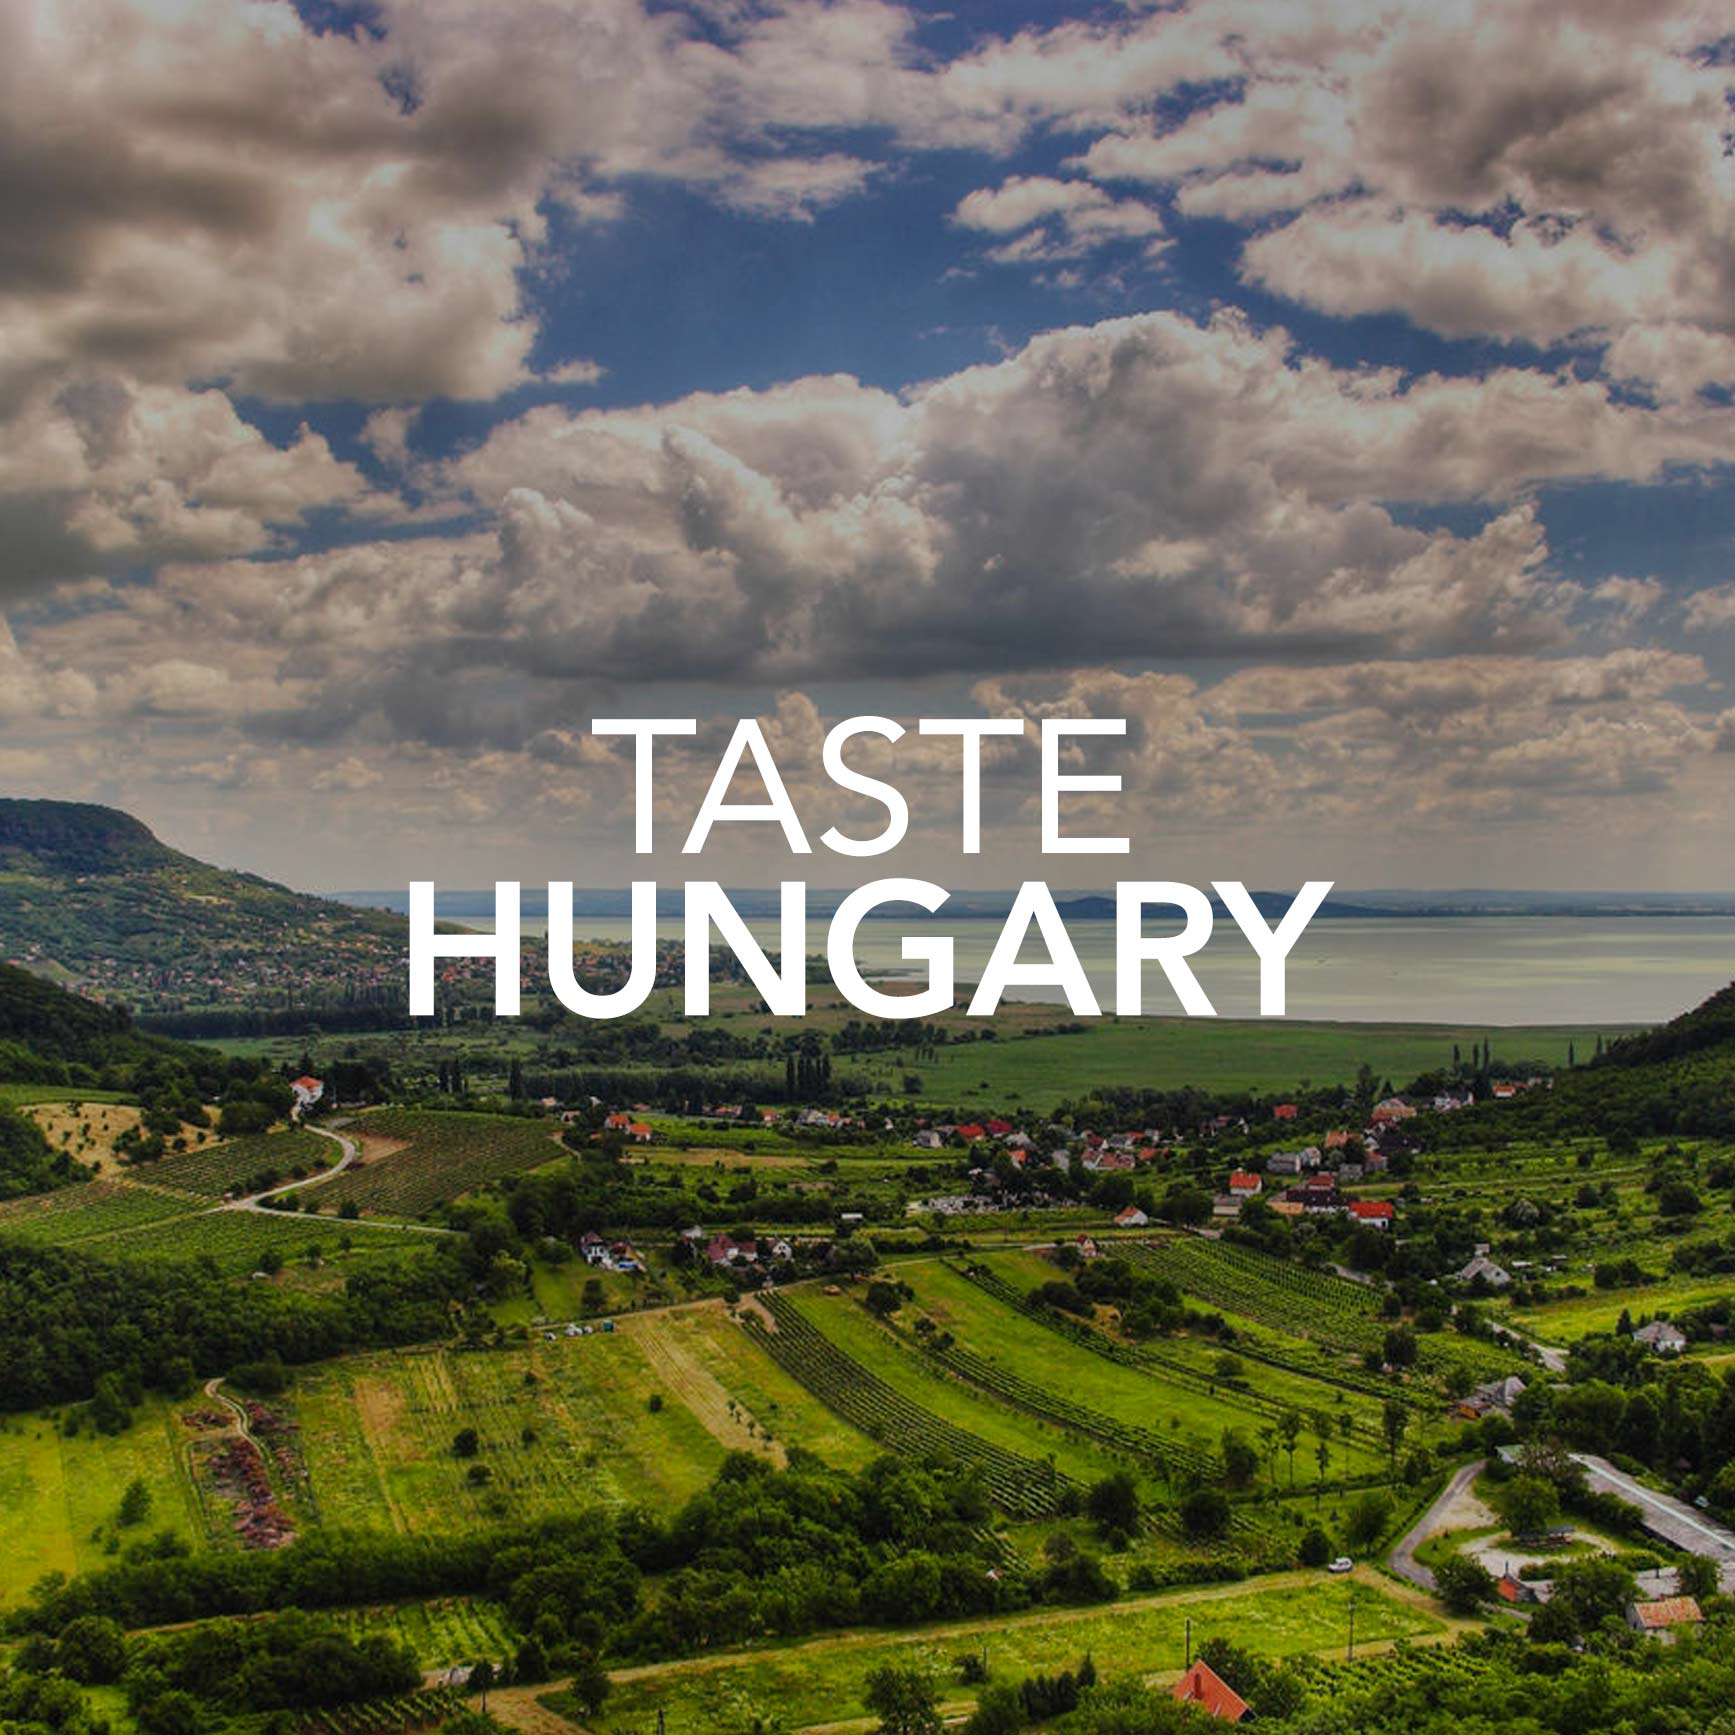 Discover hungary by bike